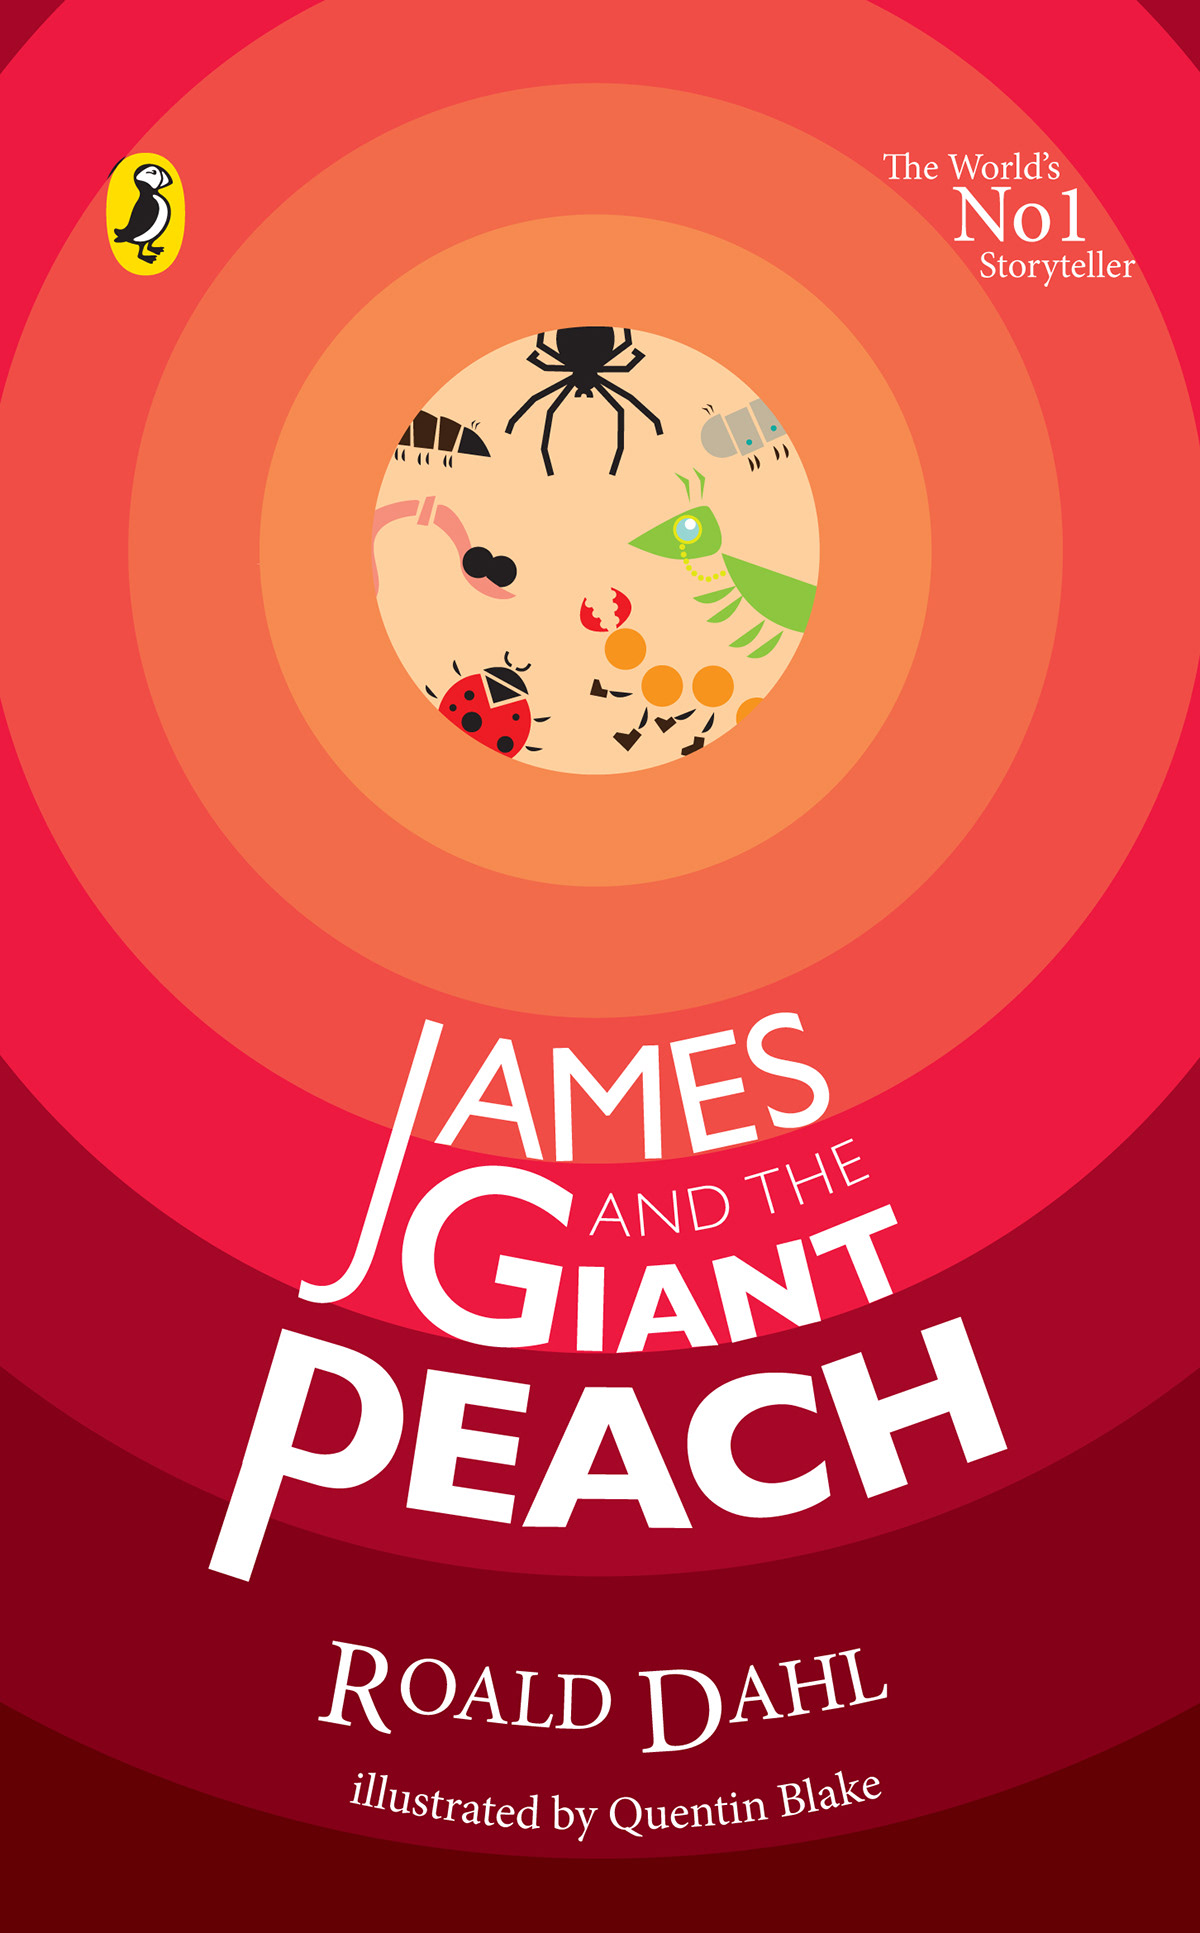 peach james giant and the puffin penguin Competition 2011 children book cover children's Grasshopper bugs ladybird spider bookcover